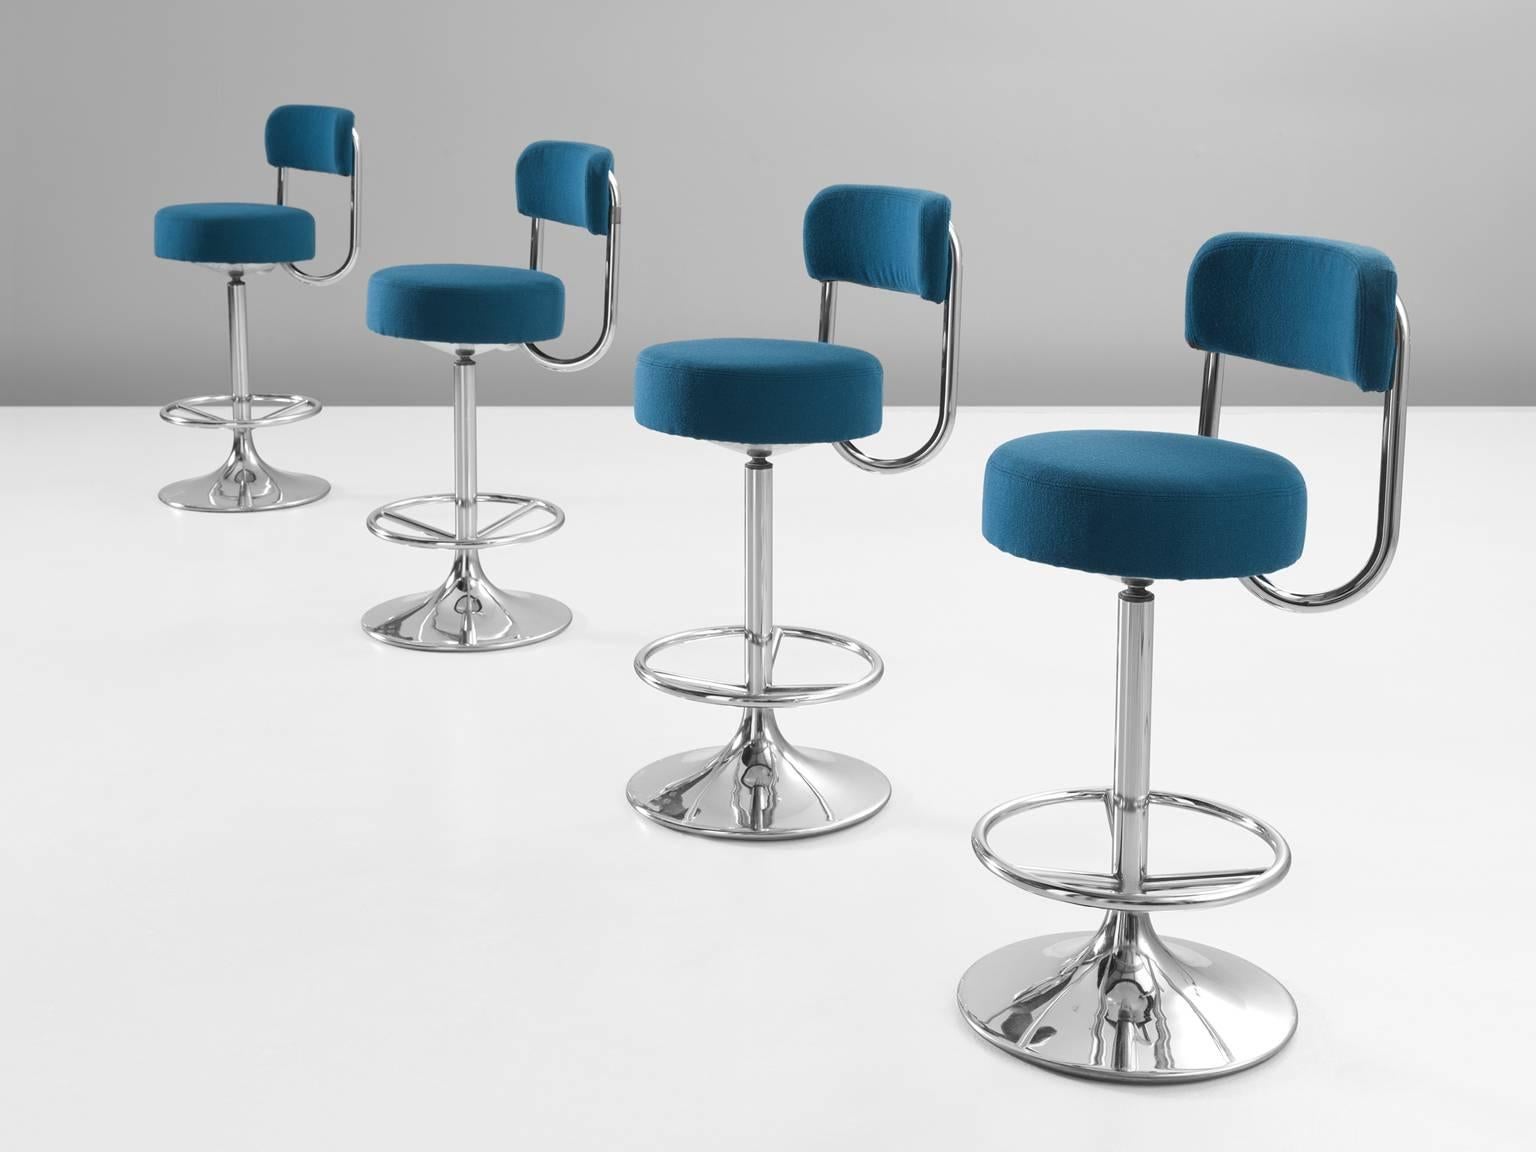 Bar stools, blue upholstery and metal, 1970s.

This set of four bar stools by Johanson is both comfortable and functional at the same time. The chairs are small in width yet still support the back. The main feature of this design is the curve in the